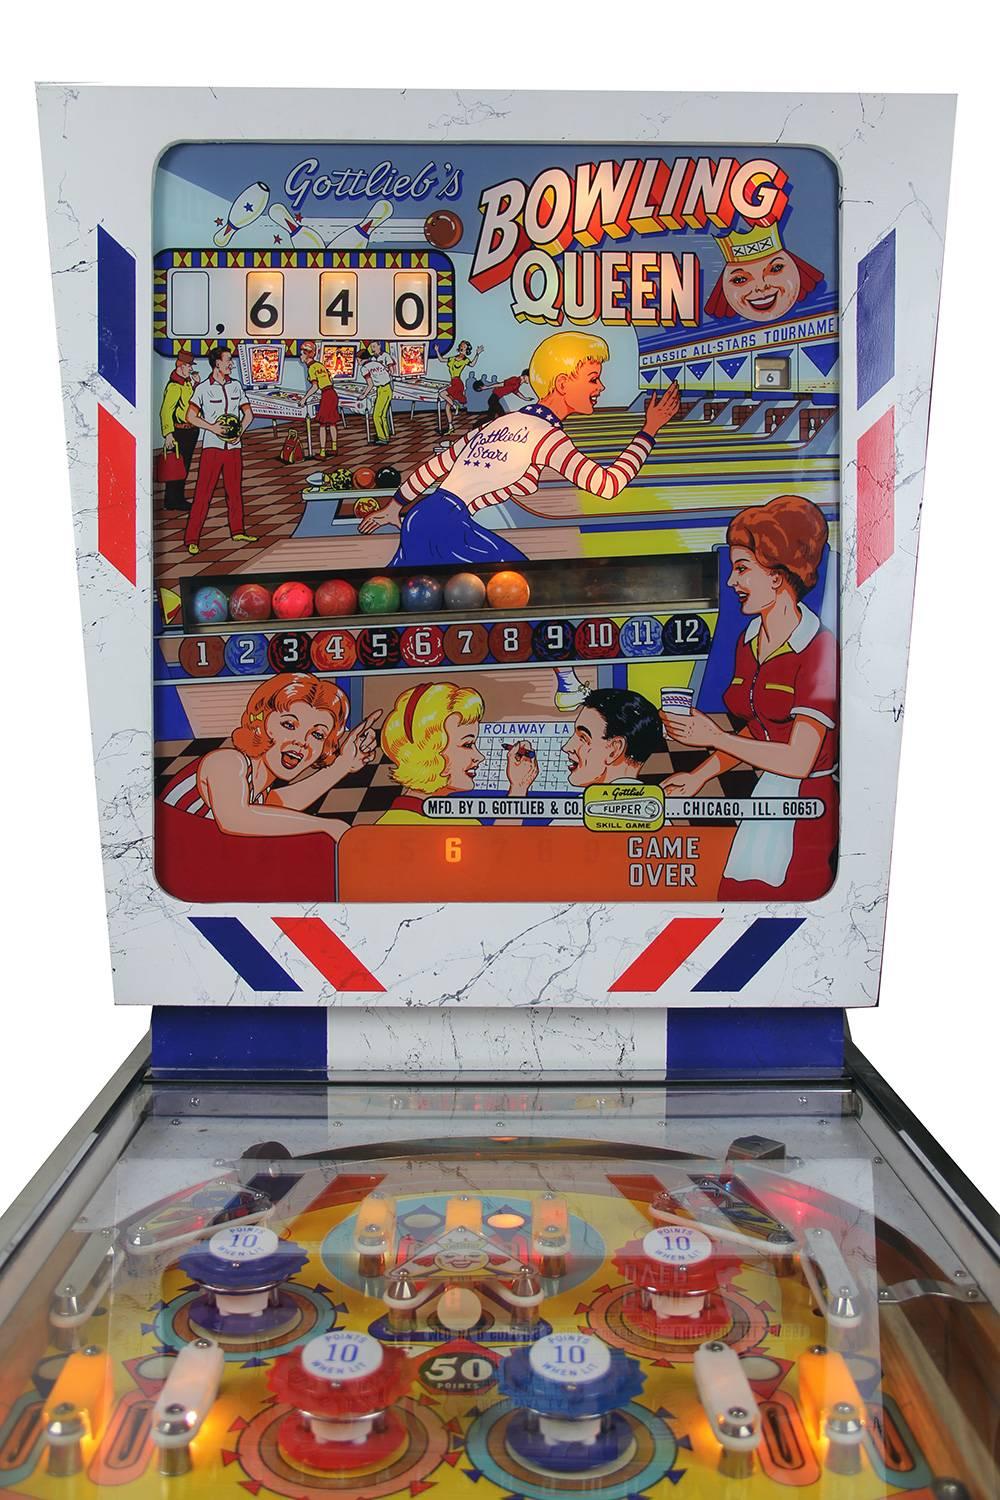 Features: Totally restored classic game from the early 1960s, includes repainted cabinet to exacting original colors and marbling effect, new backglass, 7/10 Original playfield. Mechanically totally restored. New flippers, bumpers, lamp holders,